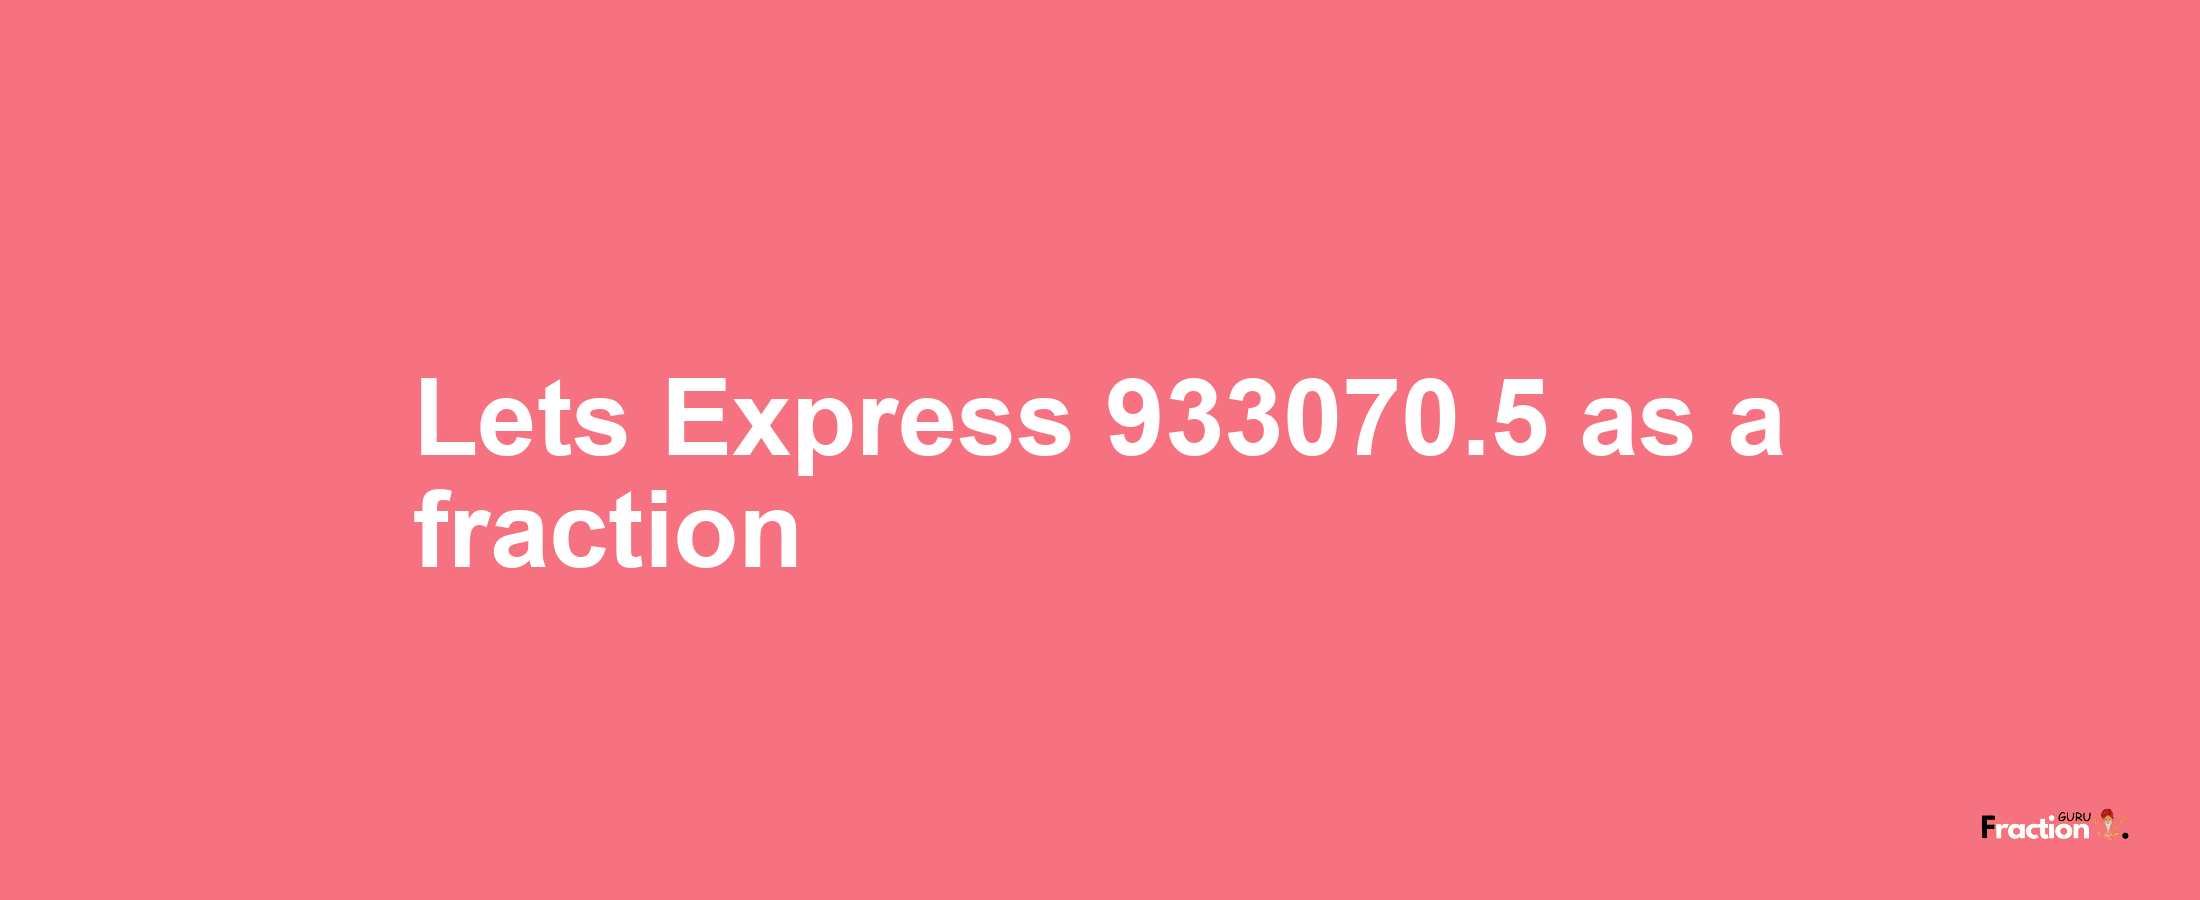 Lets Express 933070.5 as afraction